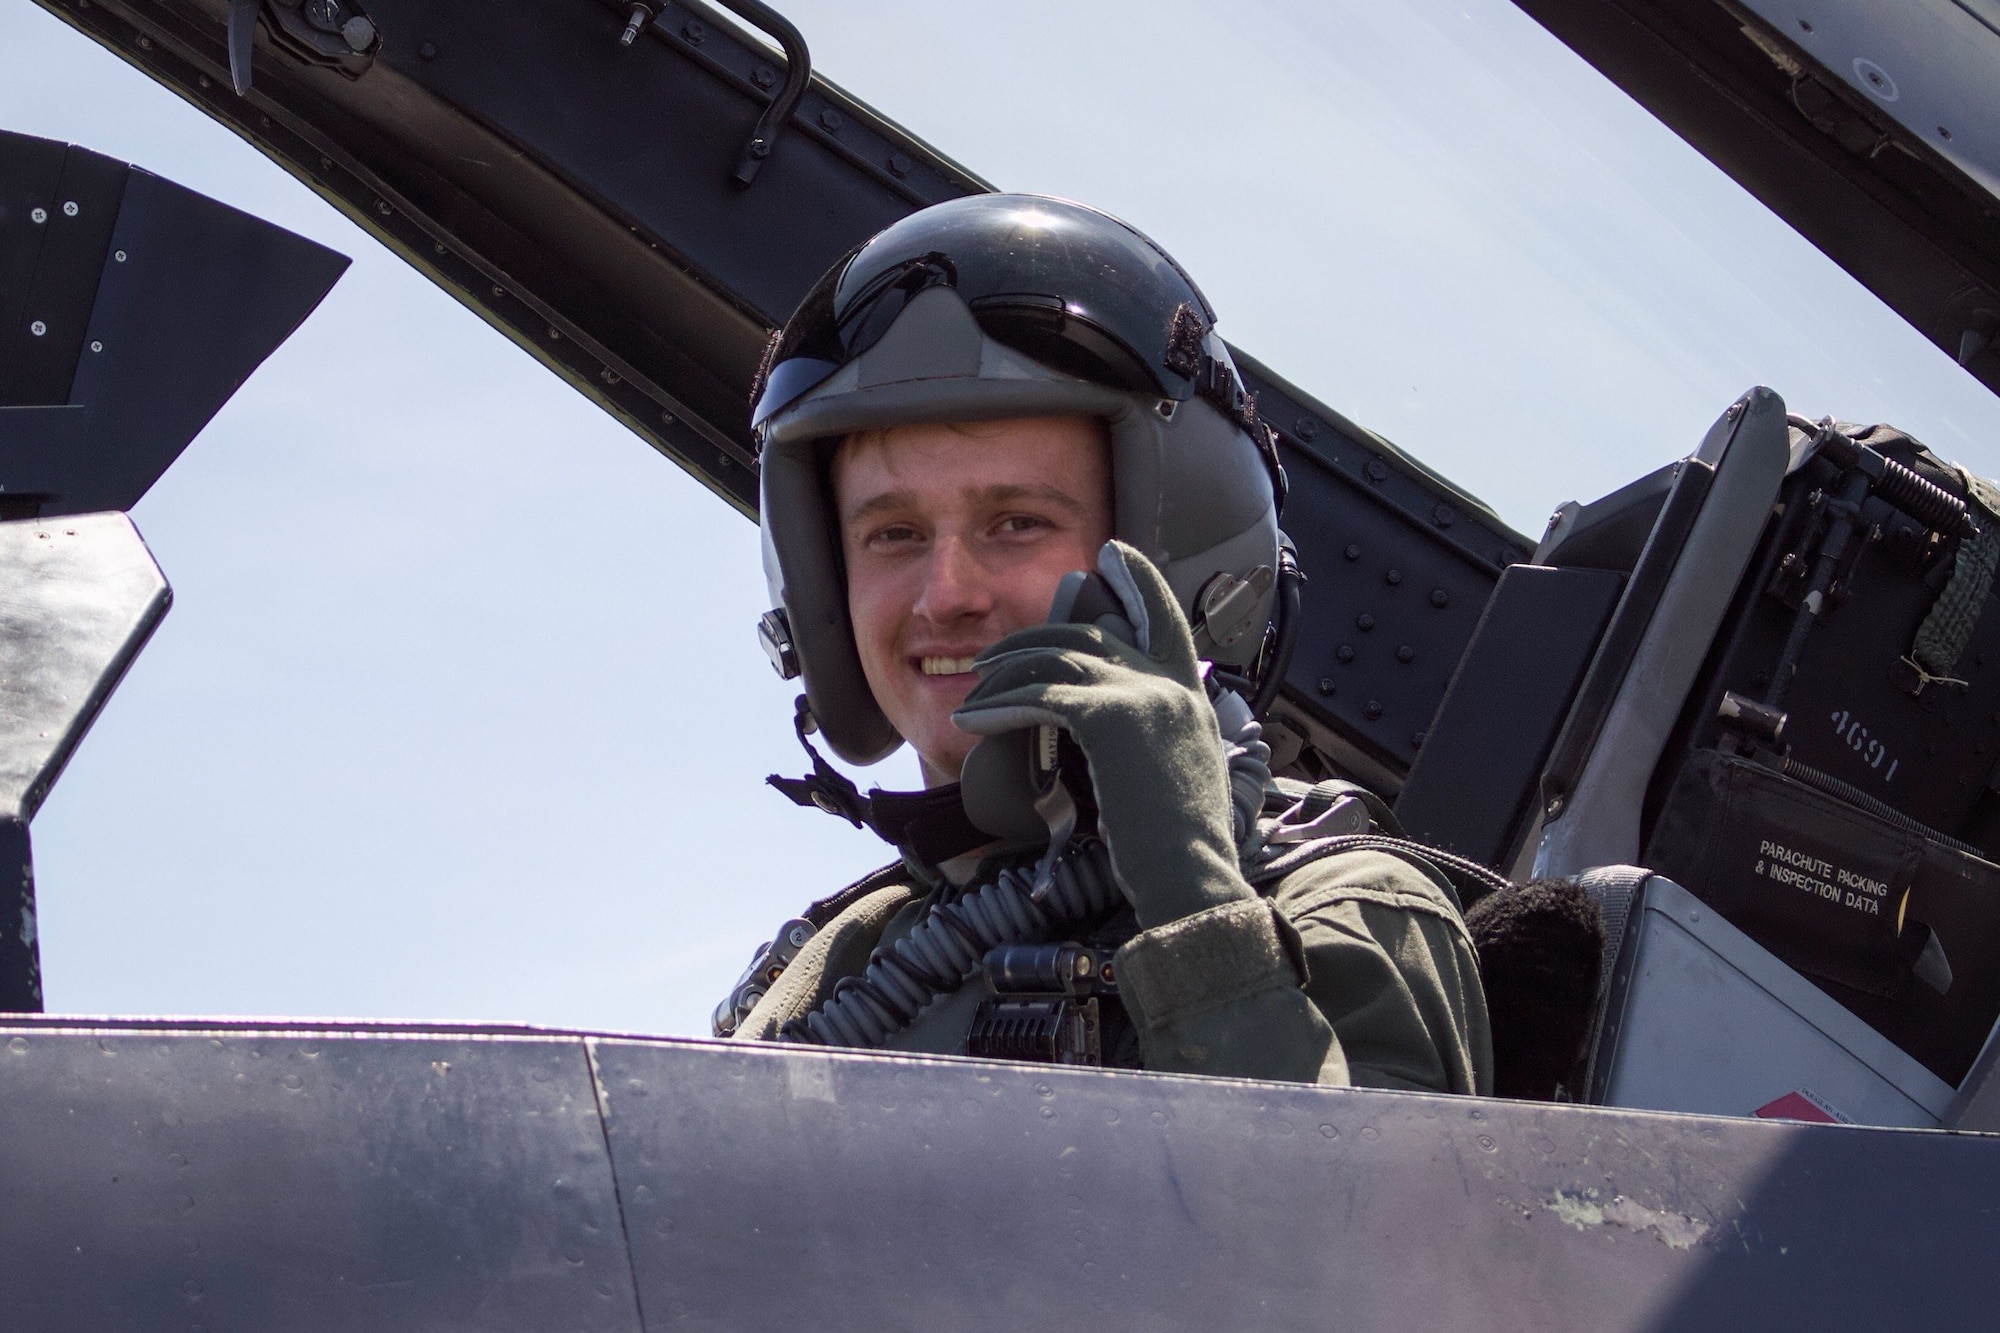 U.S. Air Force Airman 1st Class Dylan Discher, 54th Operations Support Squadron Aircrew Flight Equipment apprentice, poses for a photo before a familiarization flight in an F-16 Fighting Falcon during a temporary duty assignment with the 8th Fighter Squadron, March 29, 2019 to April 12, 2019, at Naval Air Station Joint Reserve Base New Orleans, La. Discher said having regular interactions with the pilots and hearing their stories is his favorite part about working in AFE. (Courtesy photo)